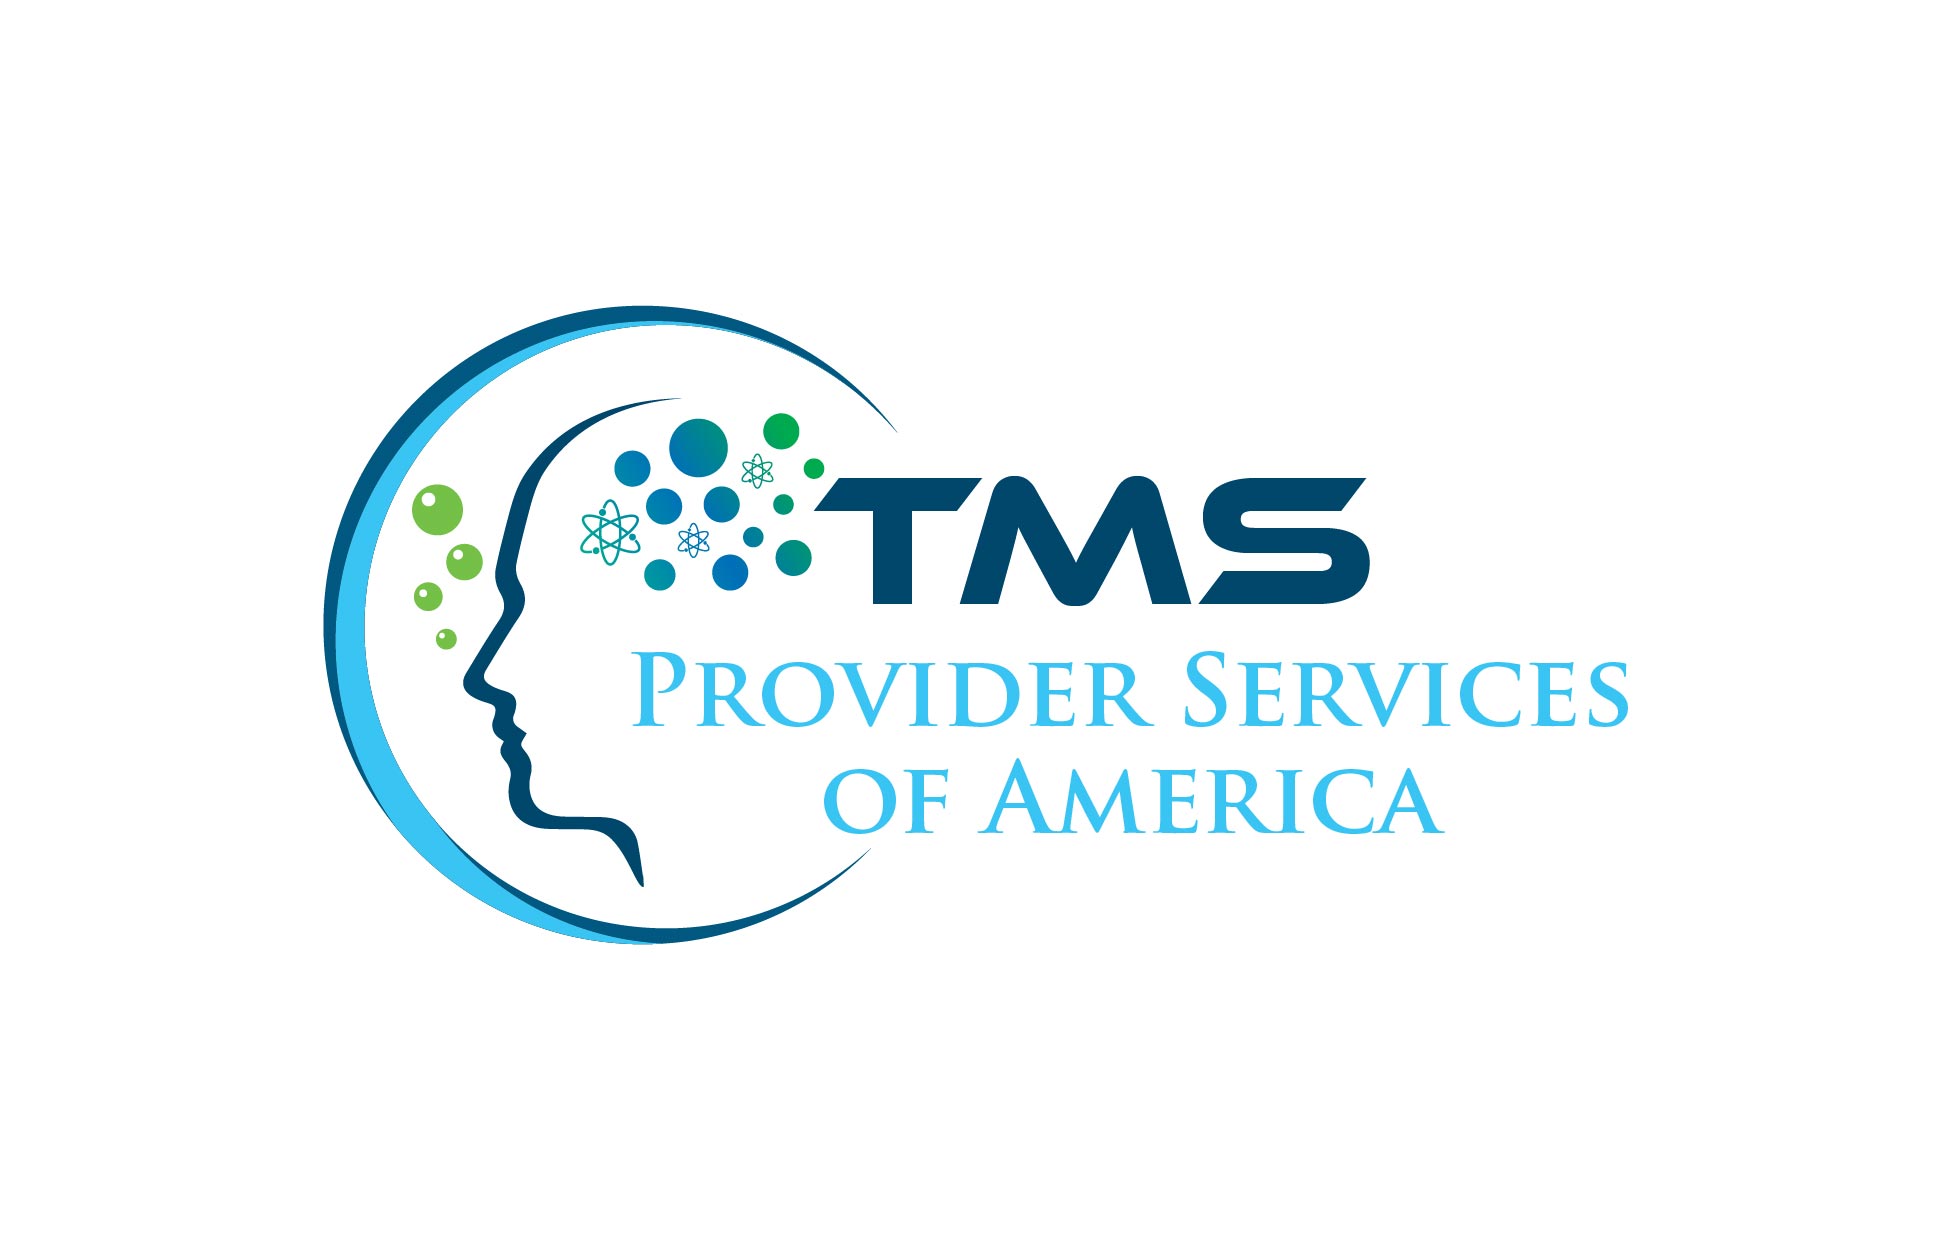 TMS Provider Services of America